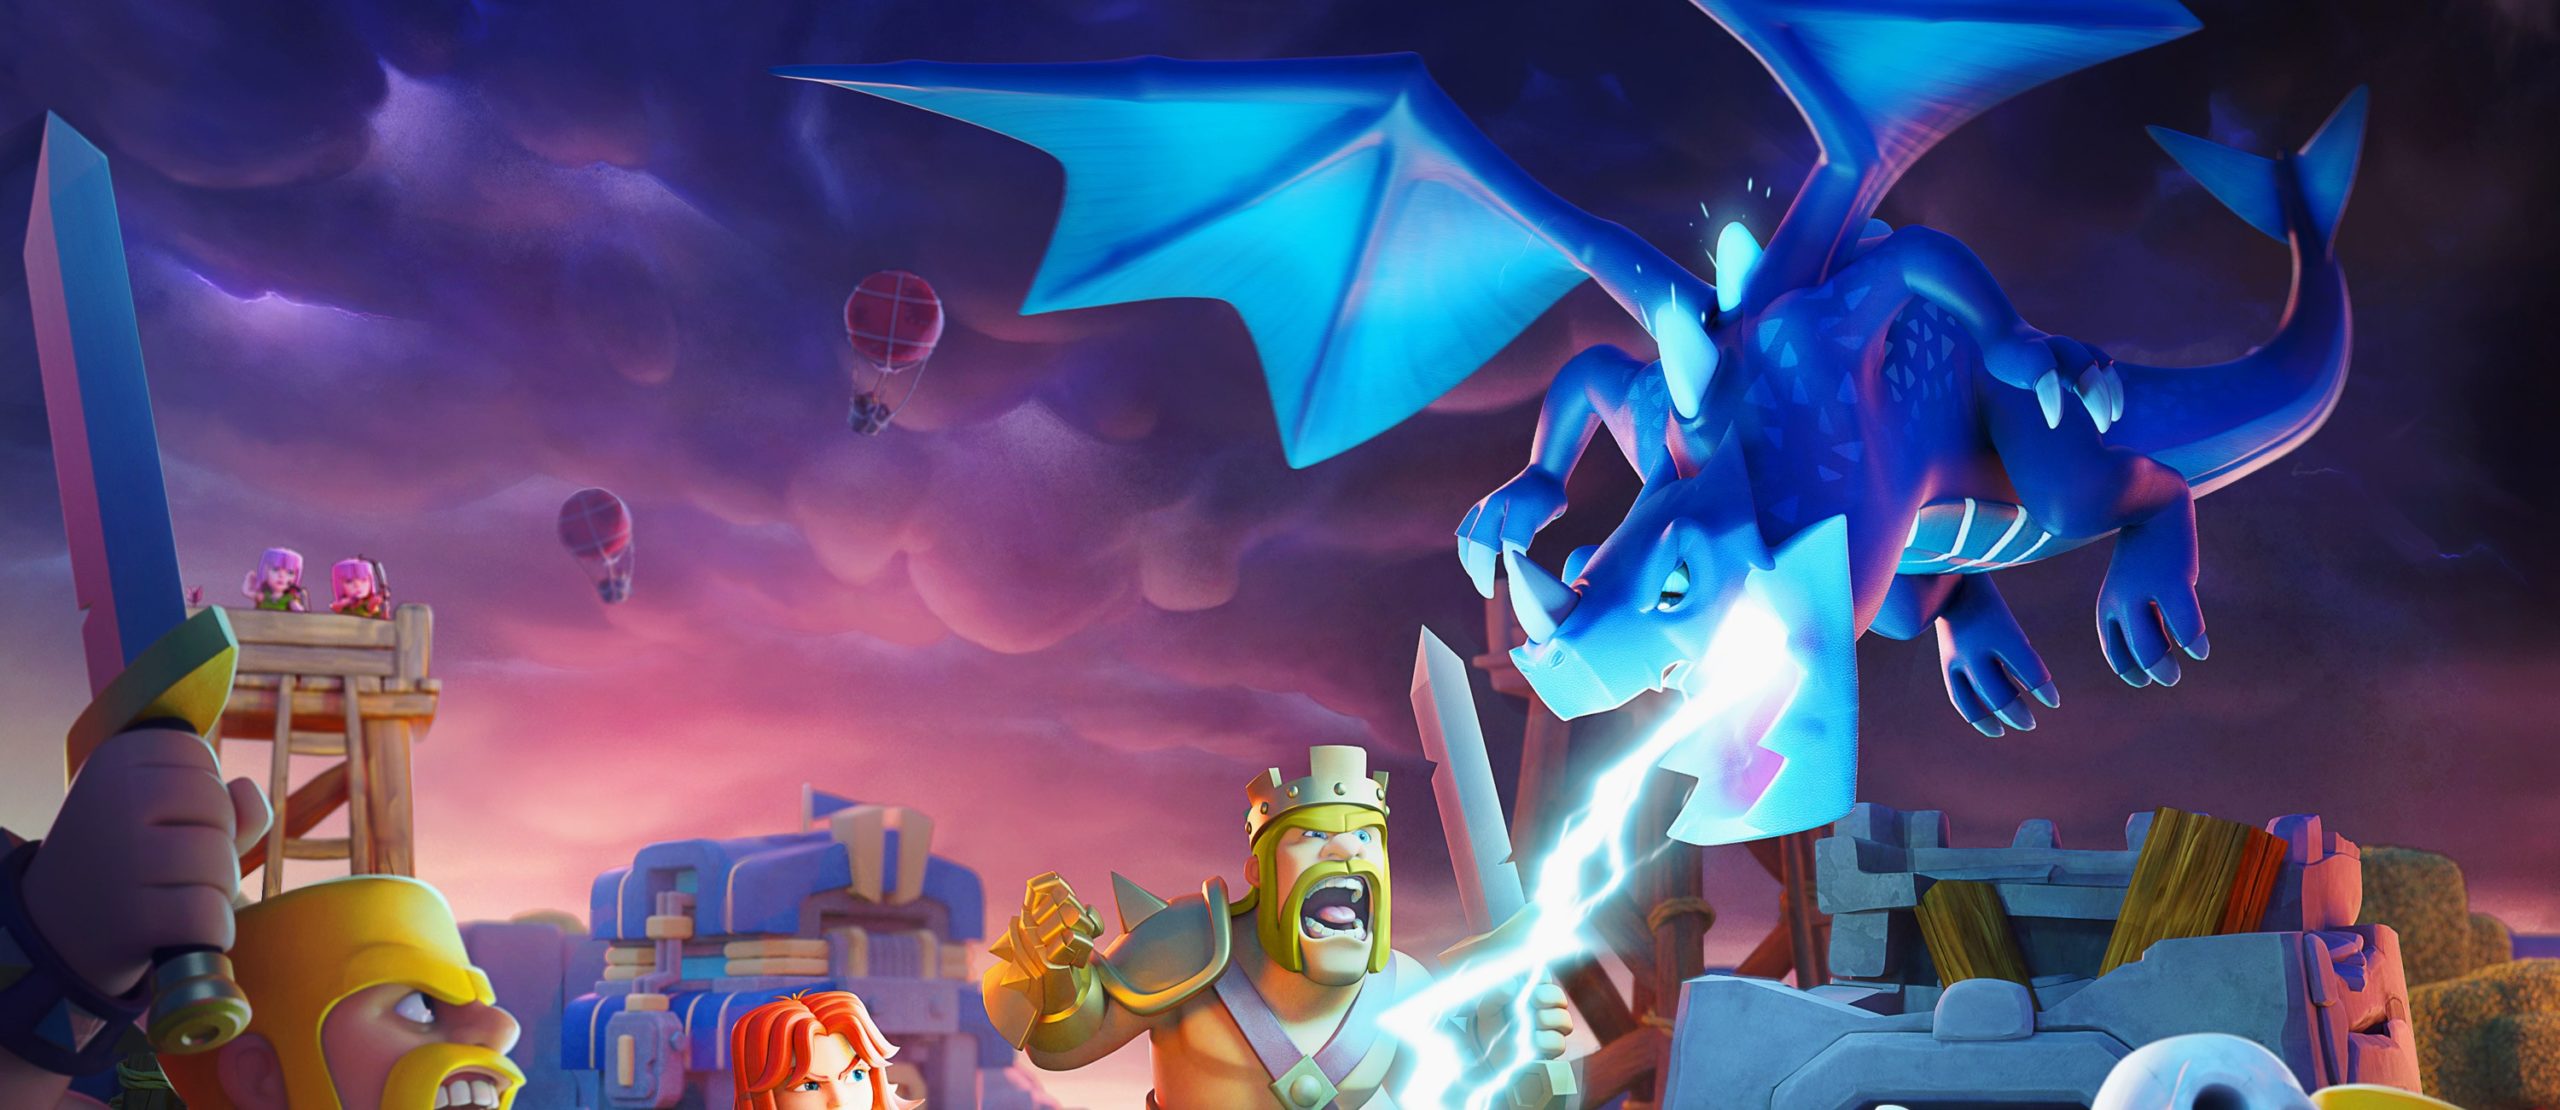 Clash of Clans 13.180.6 Update Brings Four Super Troops, Changes to